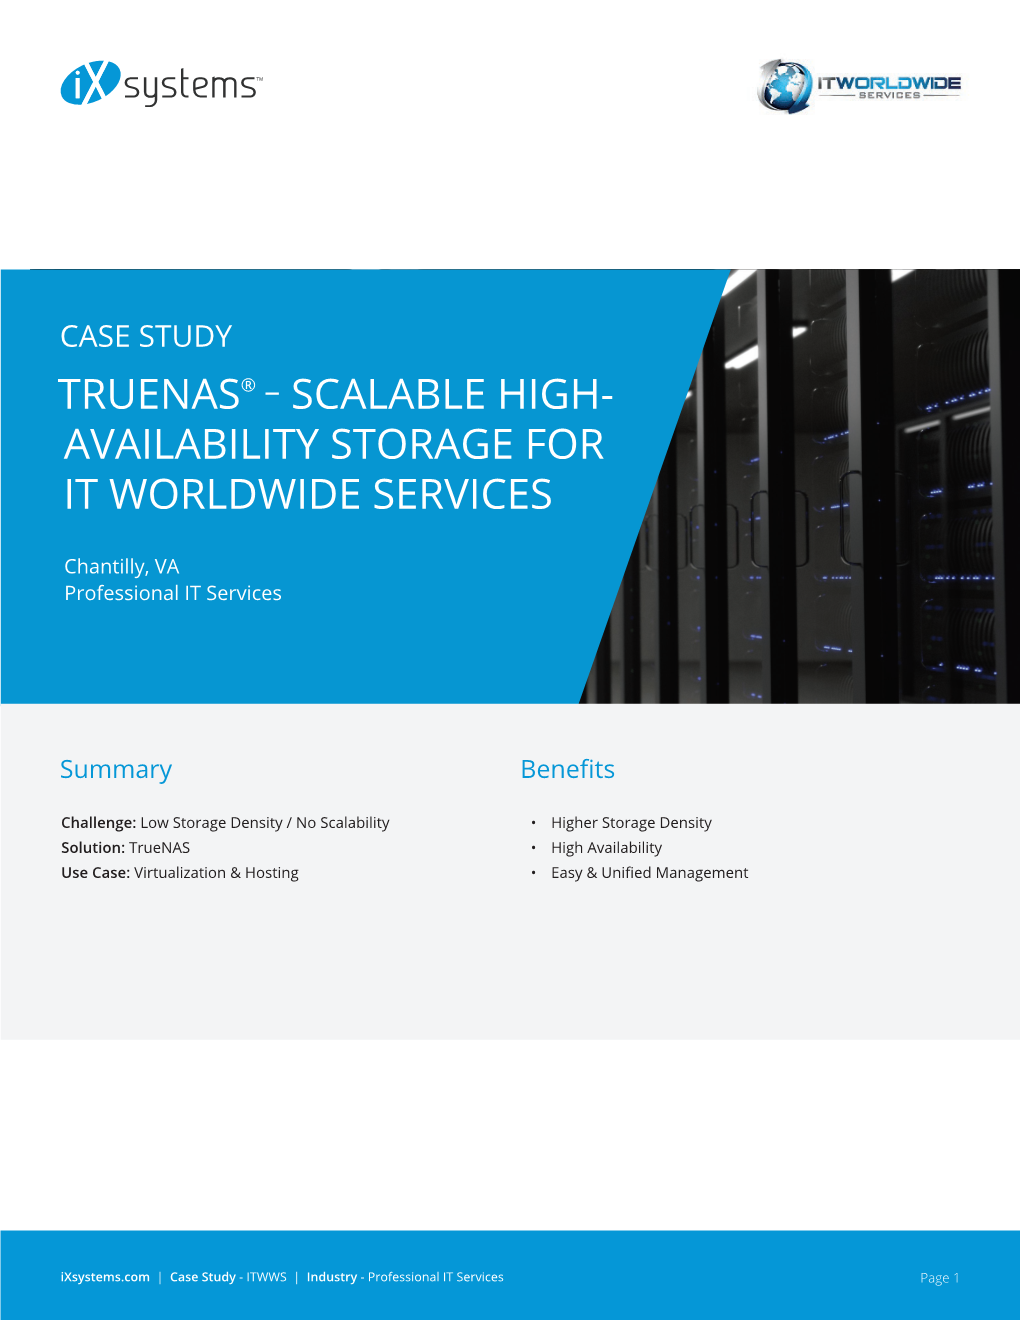 Scalable High- Availability Storage for It Worldwide Services